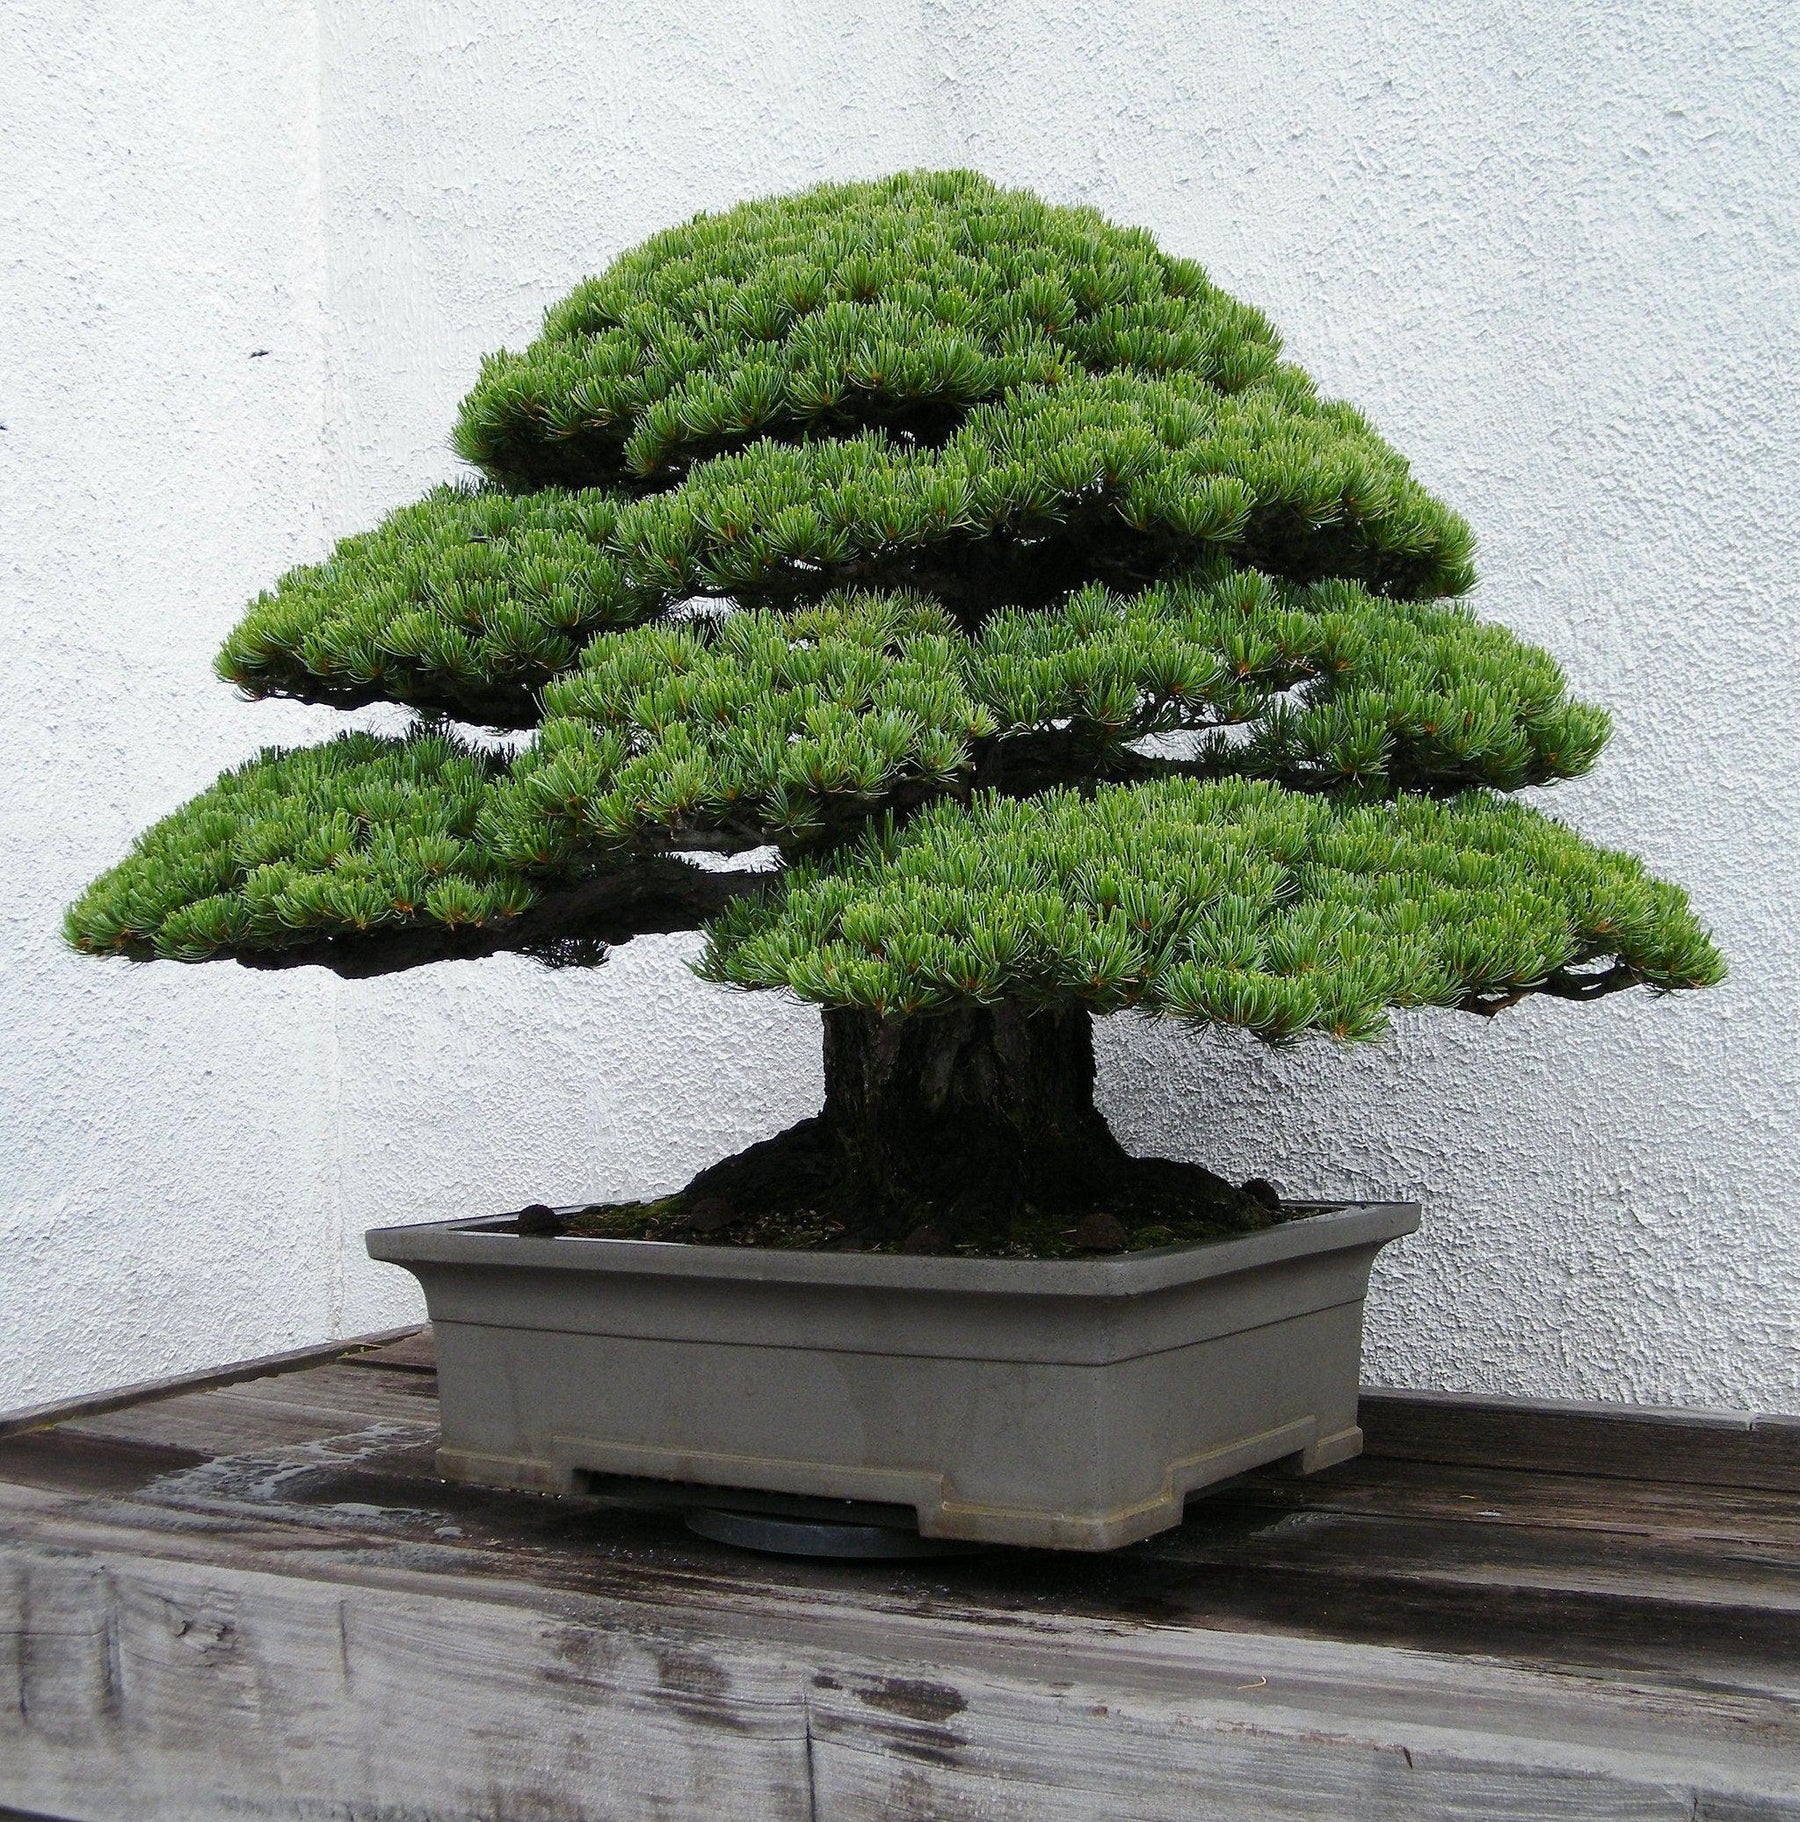 How To Care For Your Japanese White Pine Bonsai Tree